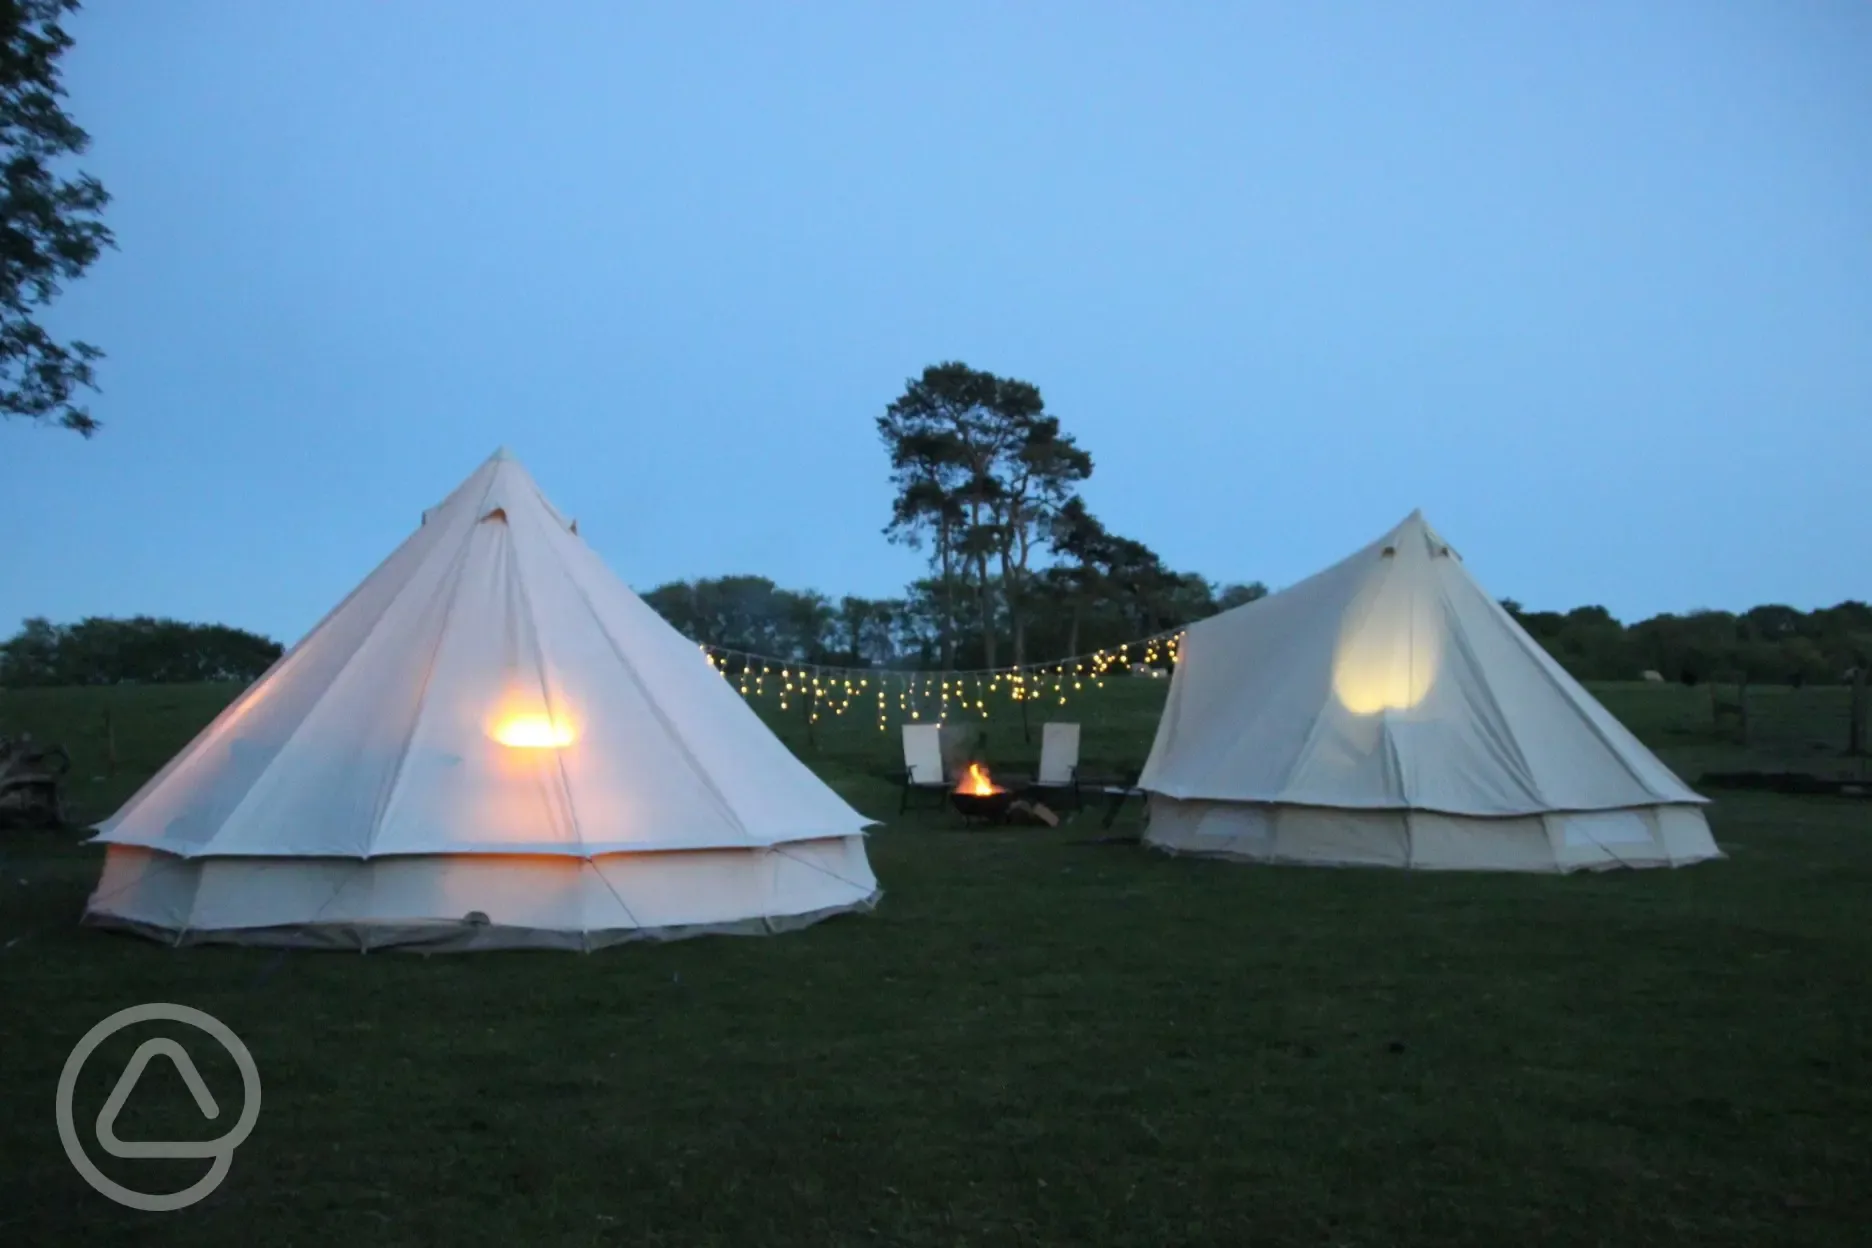 Bell tents by night